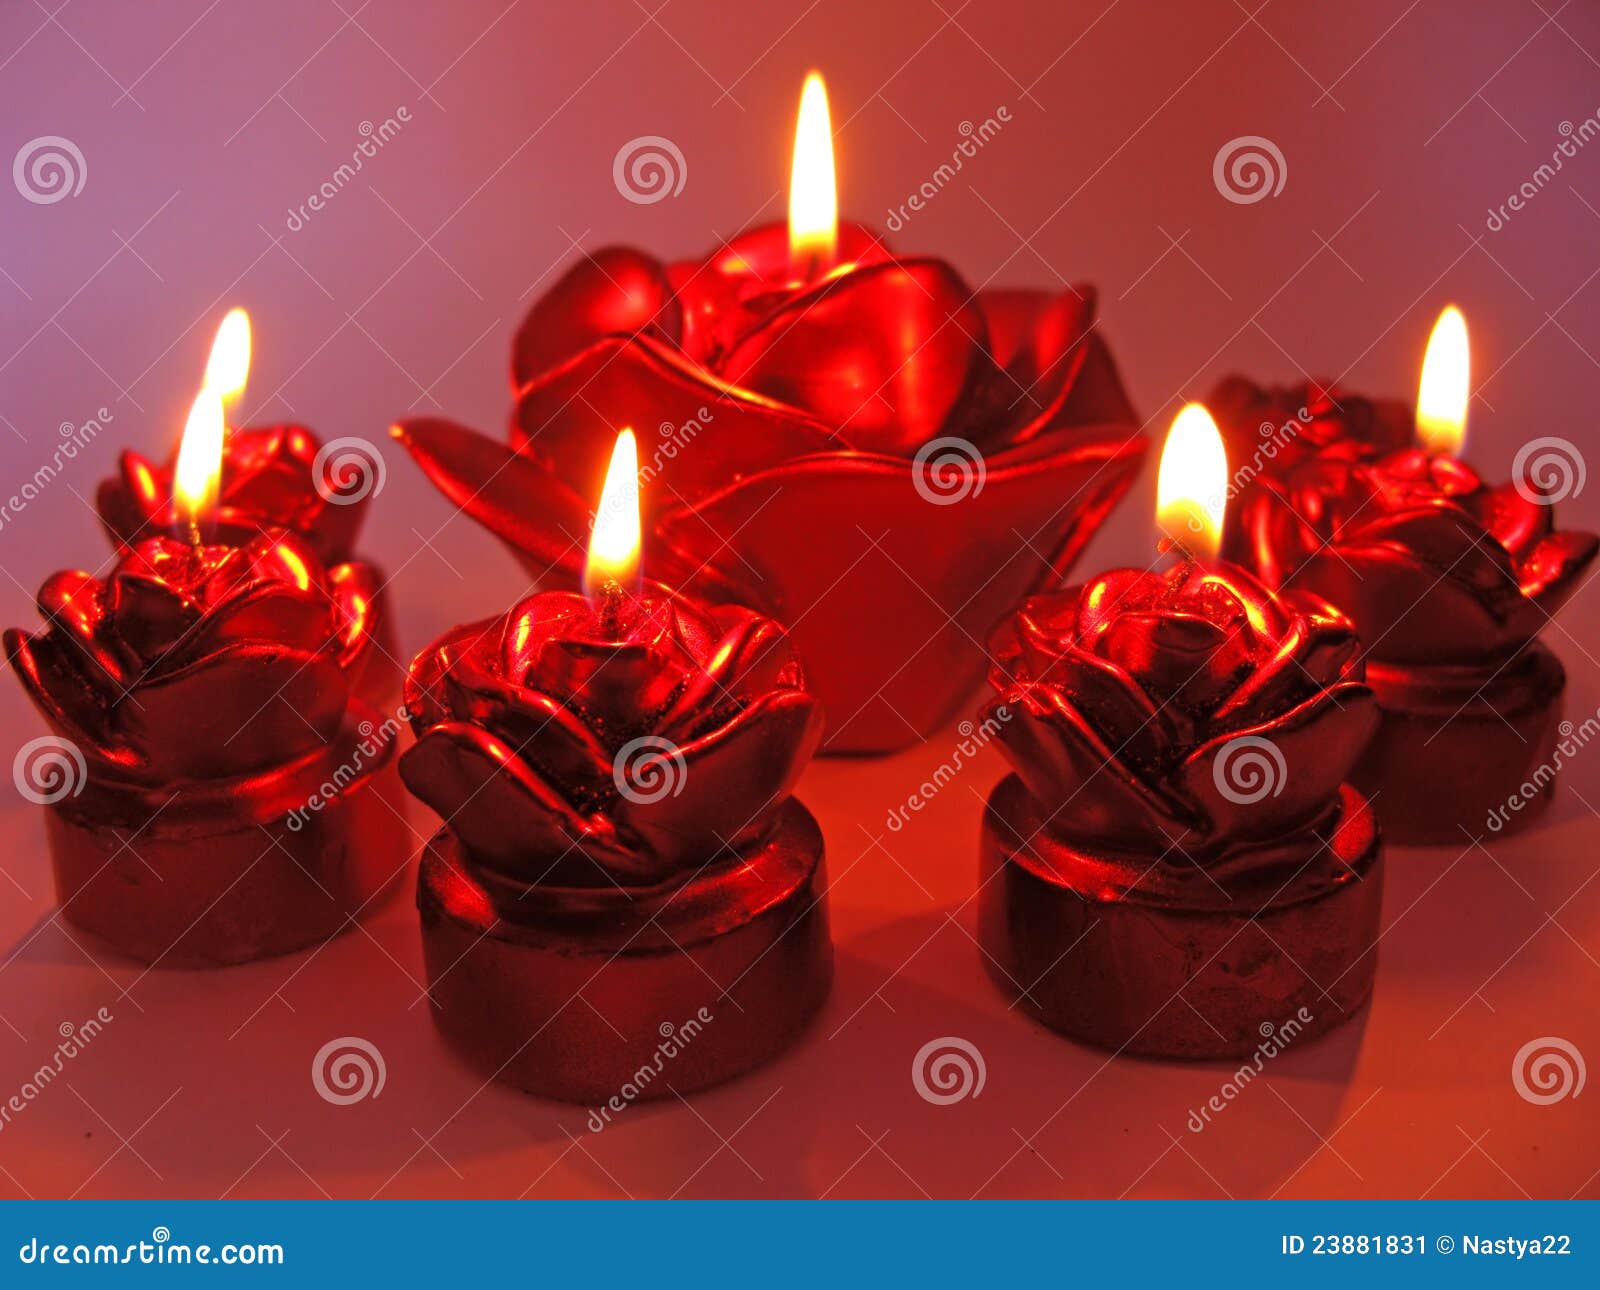 Red Roses With Candles